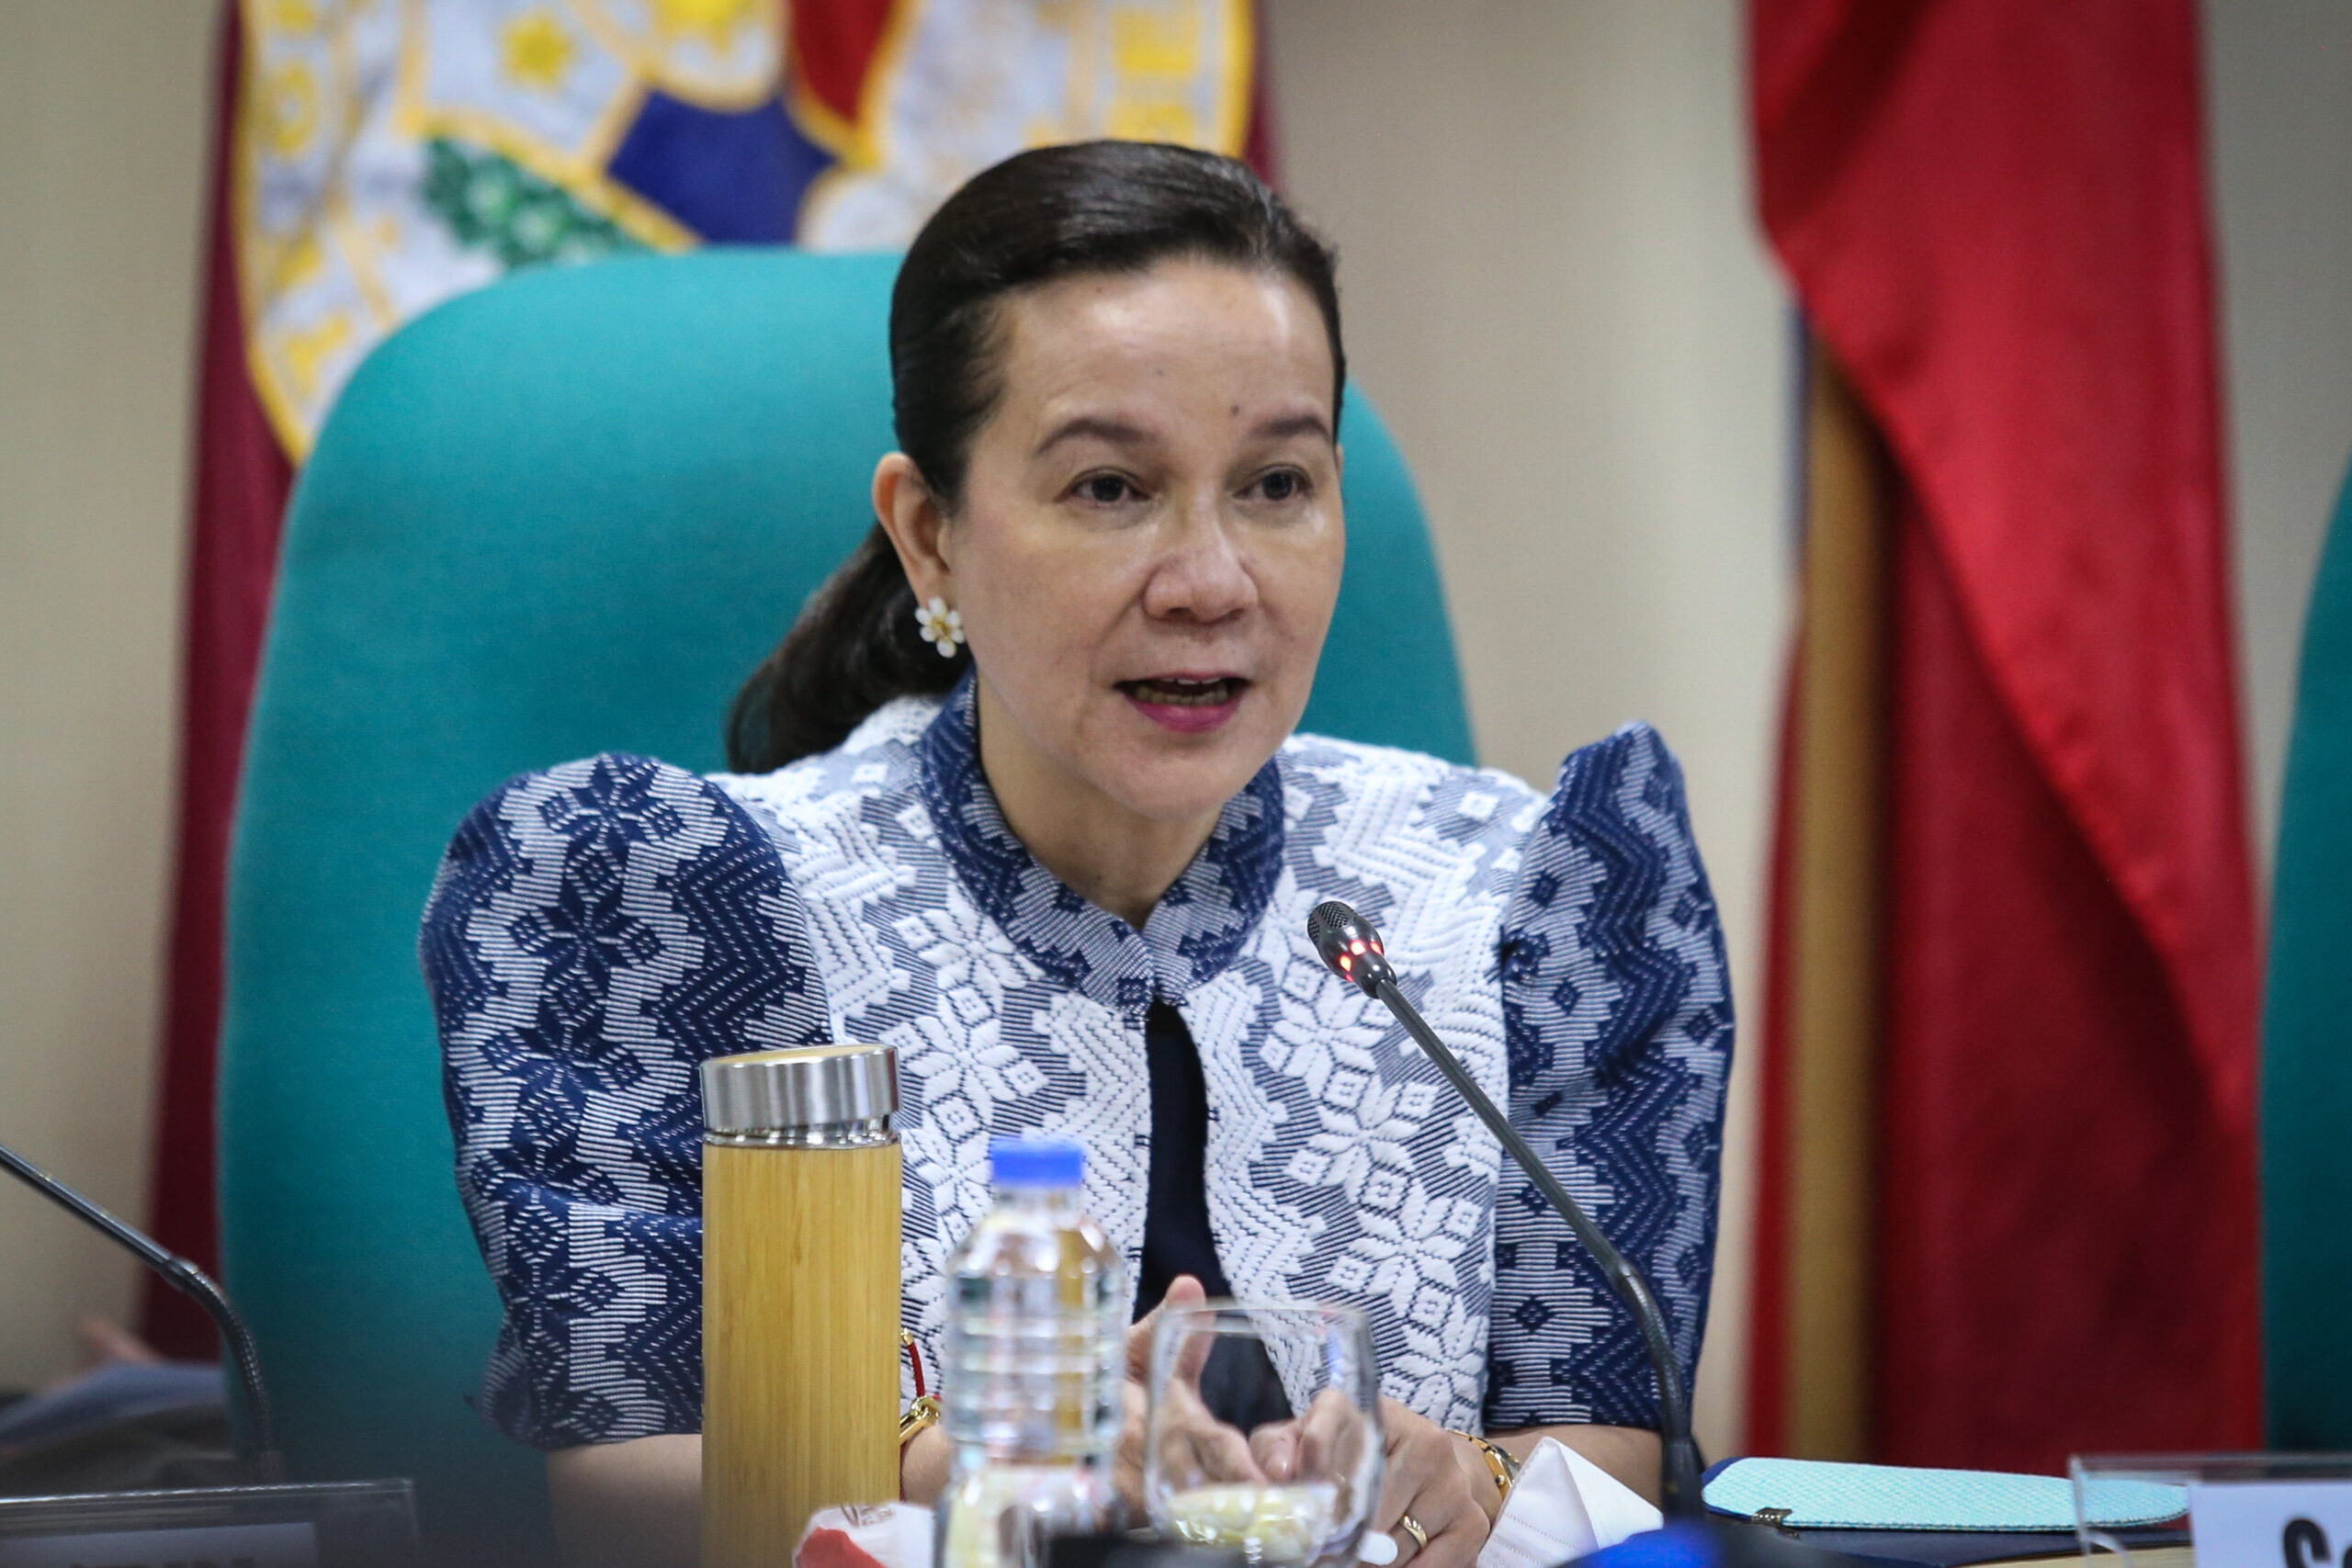 Sen. Grace Poe on Friday underscored the importance of enacting a law on freedom of information (FOI) after Malacañang expanded the restrictions of an executive order signed by former President Rodrigo Duterte that further limited public access to official records.